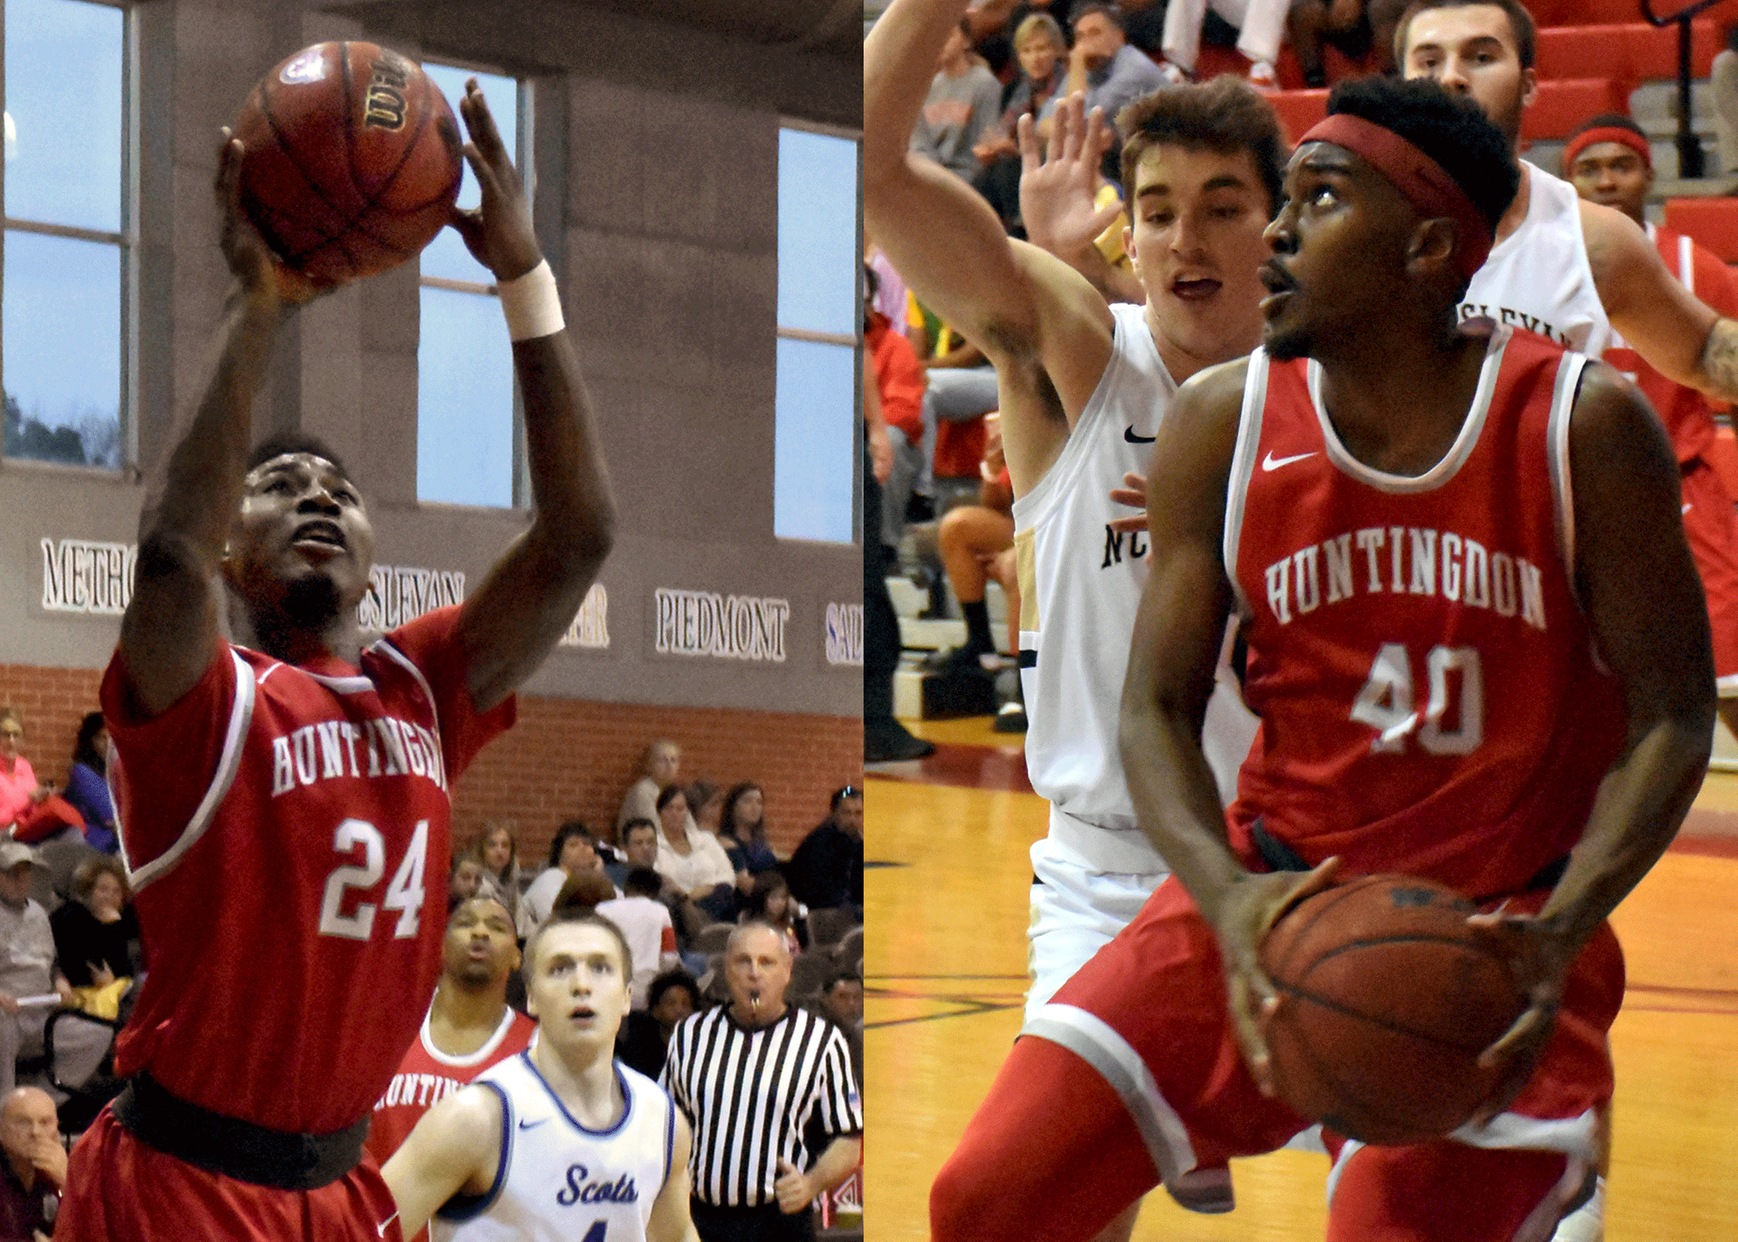 Kyante Pines (#24) scored 21 points, including the game-winning 3-pointer in overtime, and Brandon McLean (#40) matched his career-high with 23 points to lead the Hawks past USA South West Division leader Maryville on Saturday.